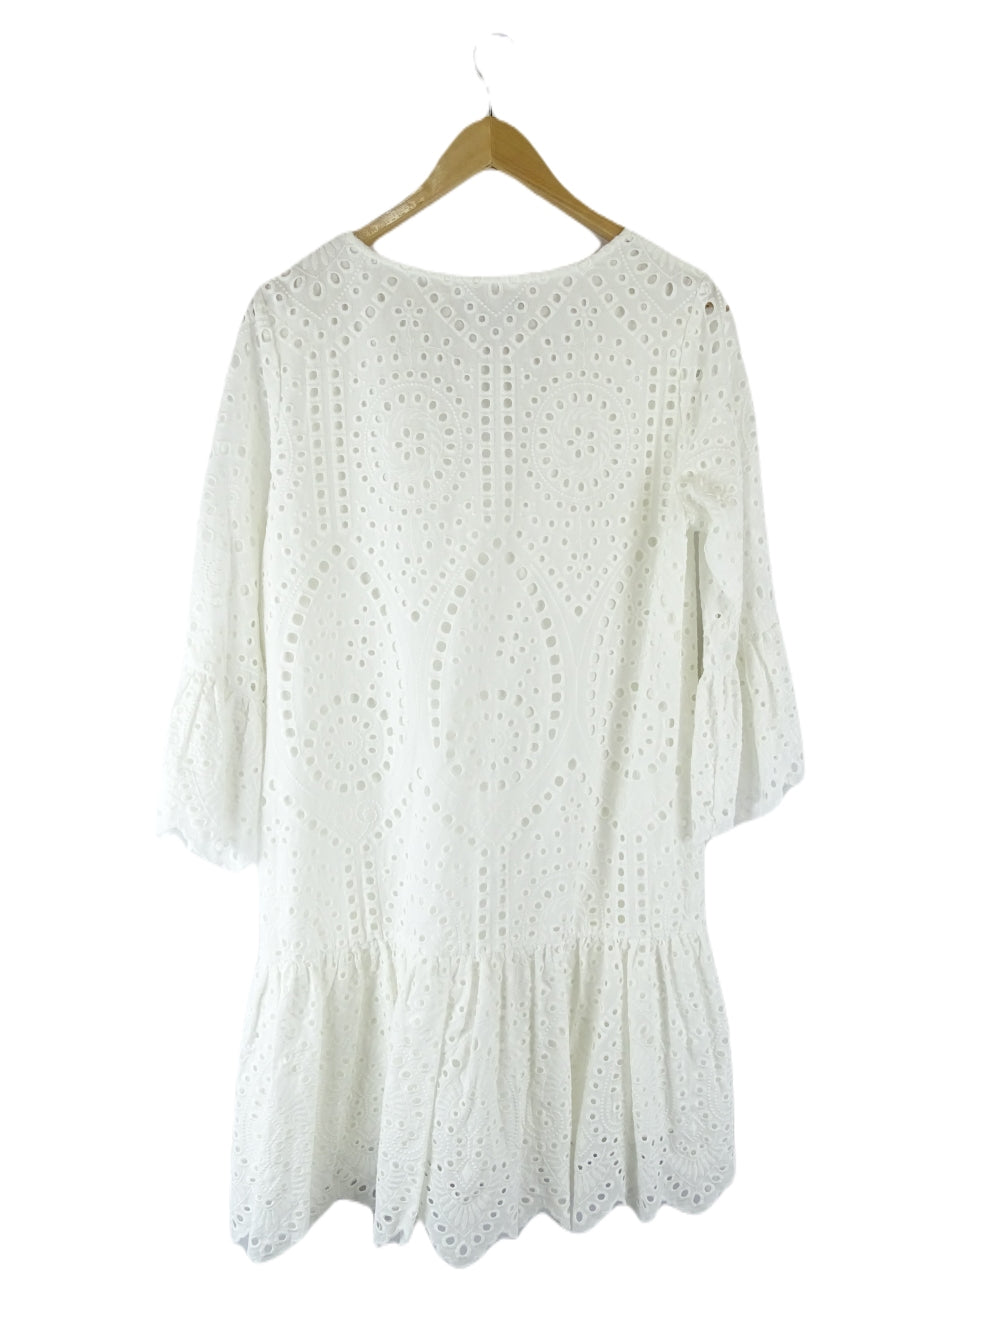 Auguste White Lace Dress S